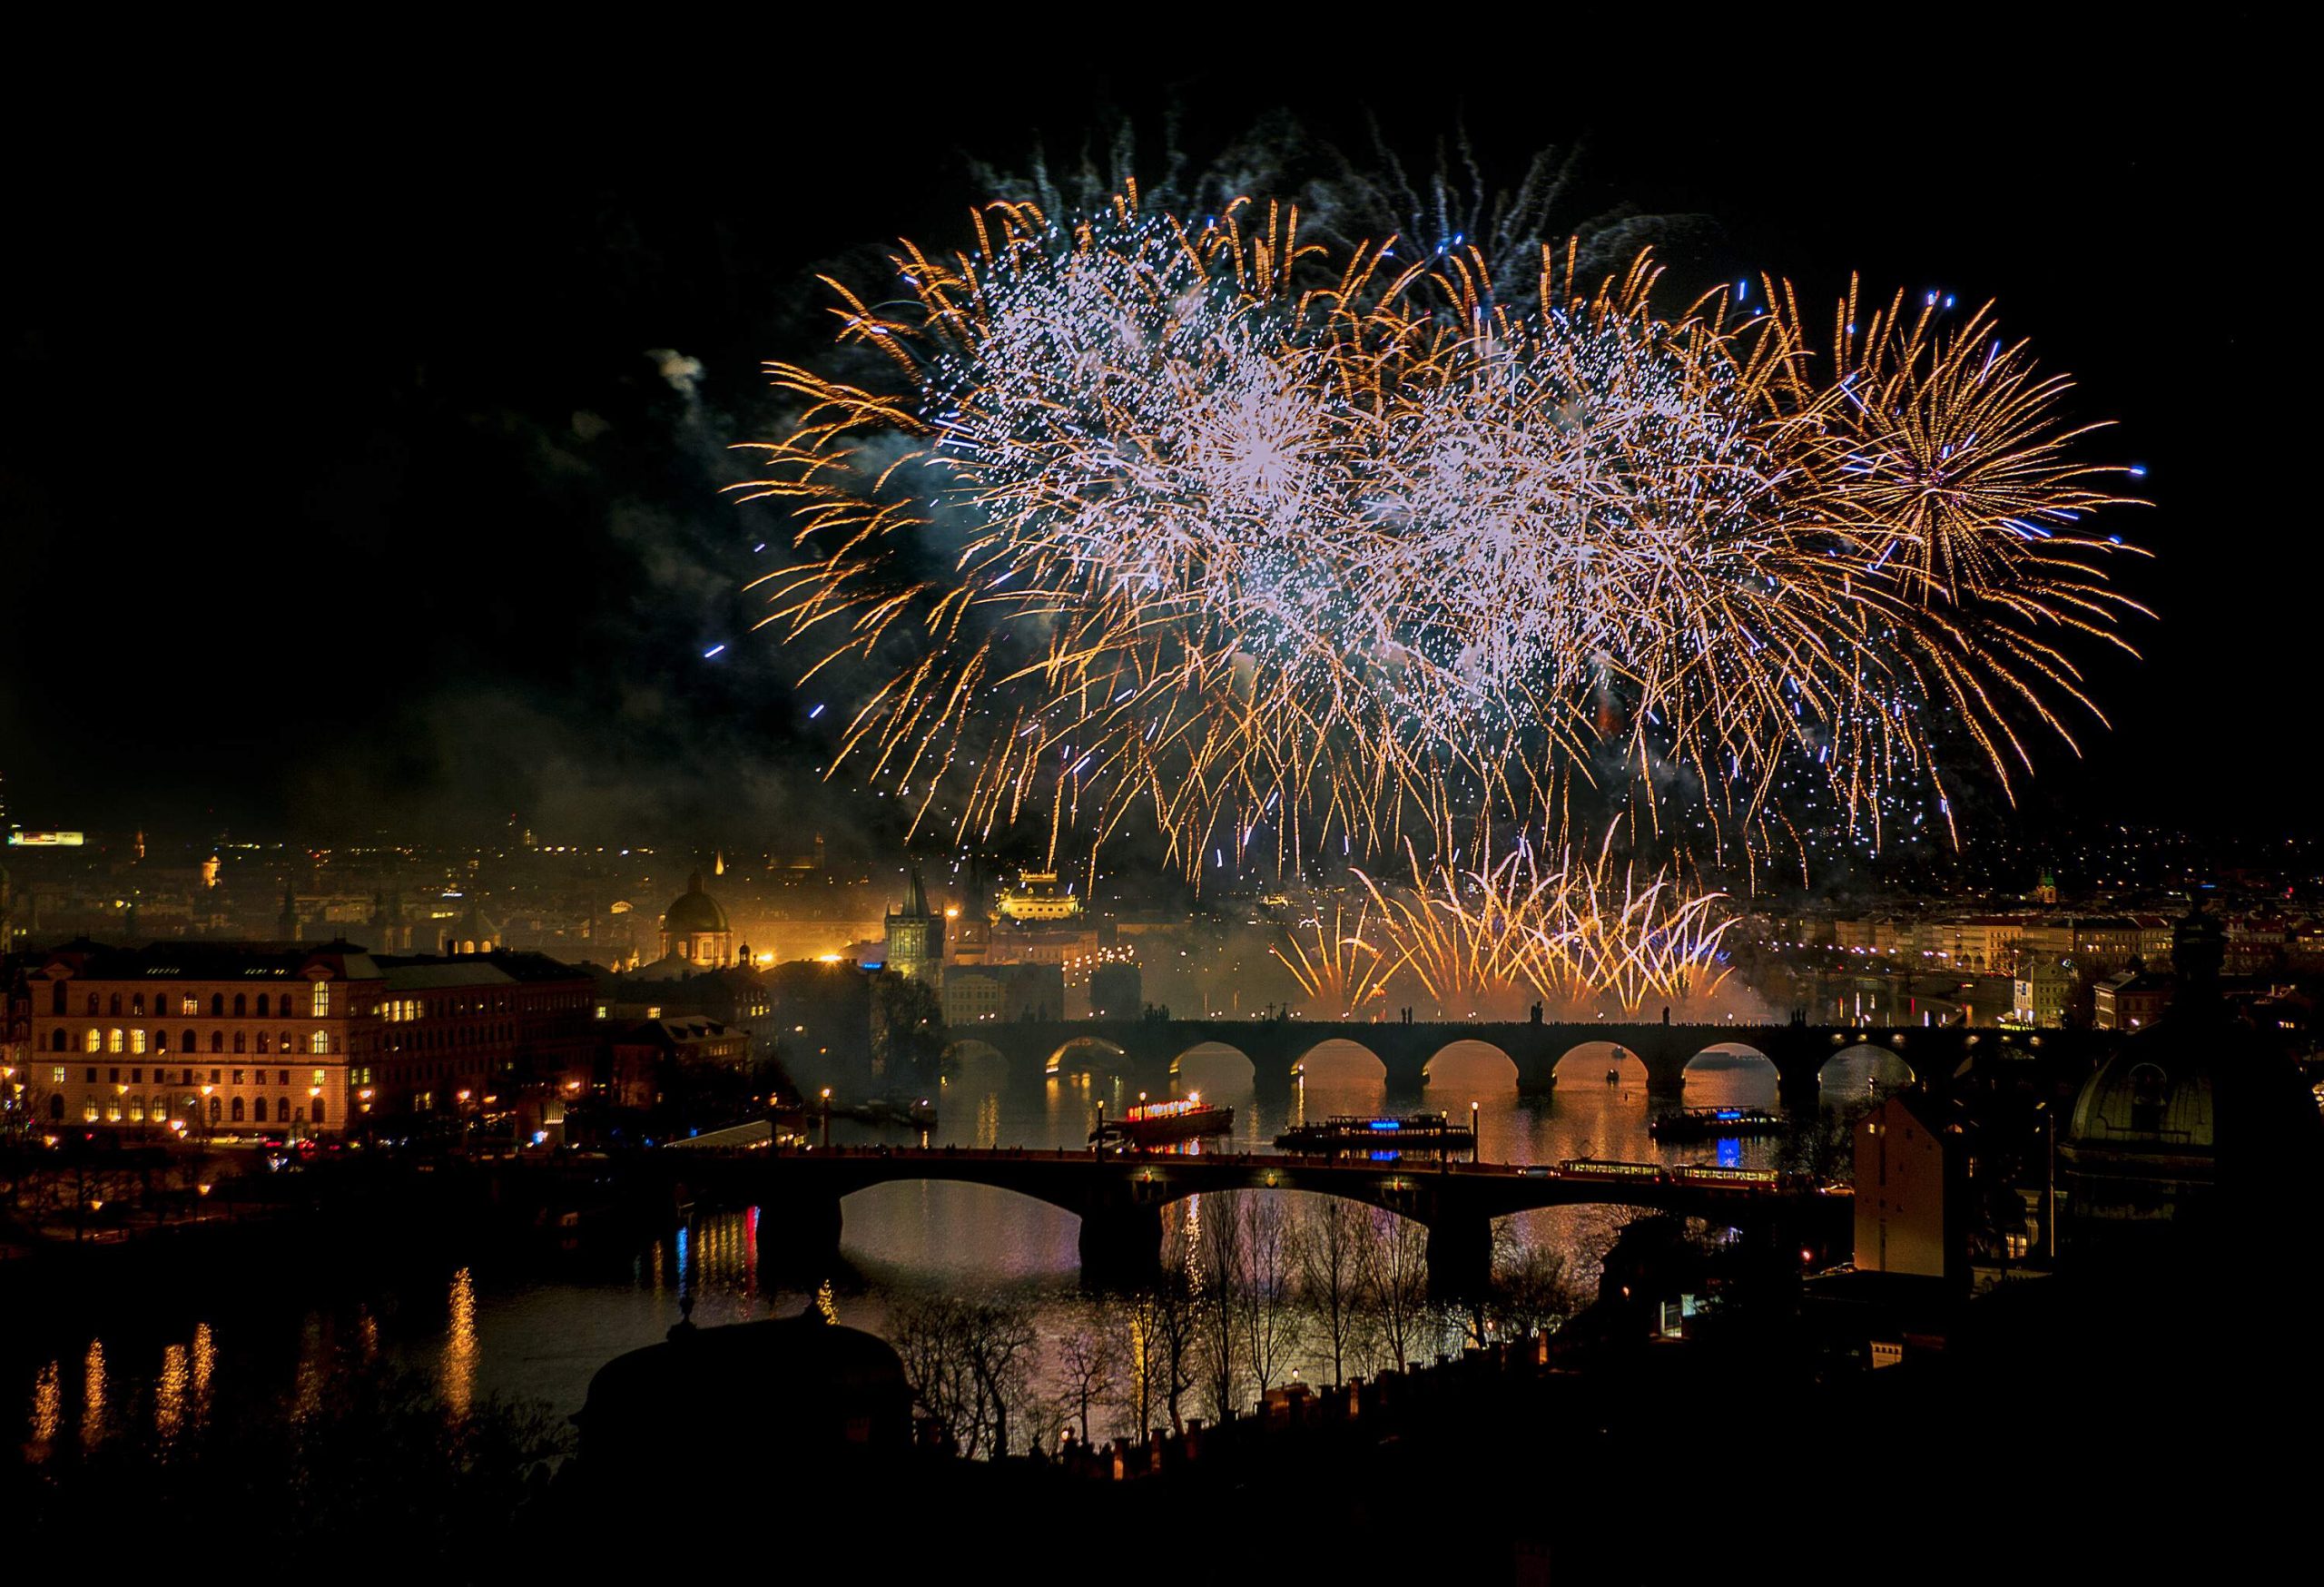 Exploding fireworks lit the dark sky above a broad river spanned by bridges in a populous city.